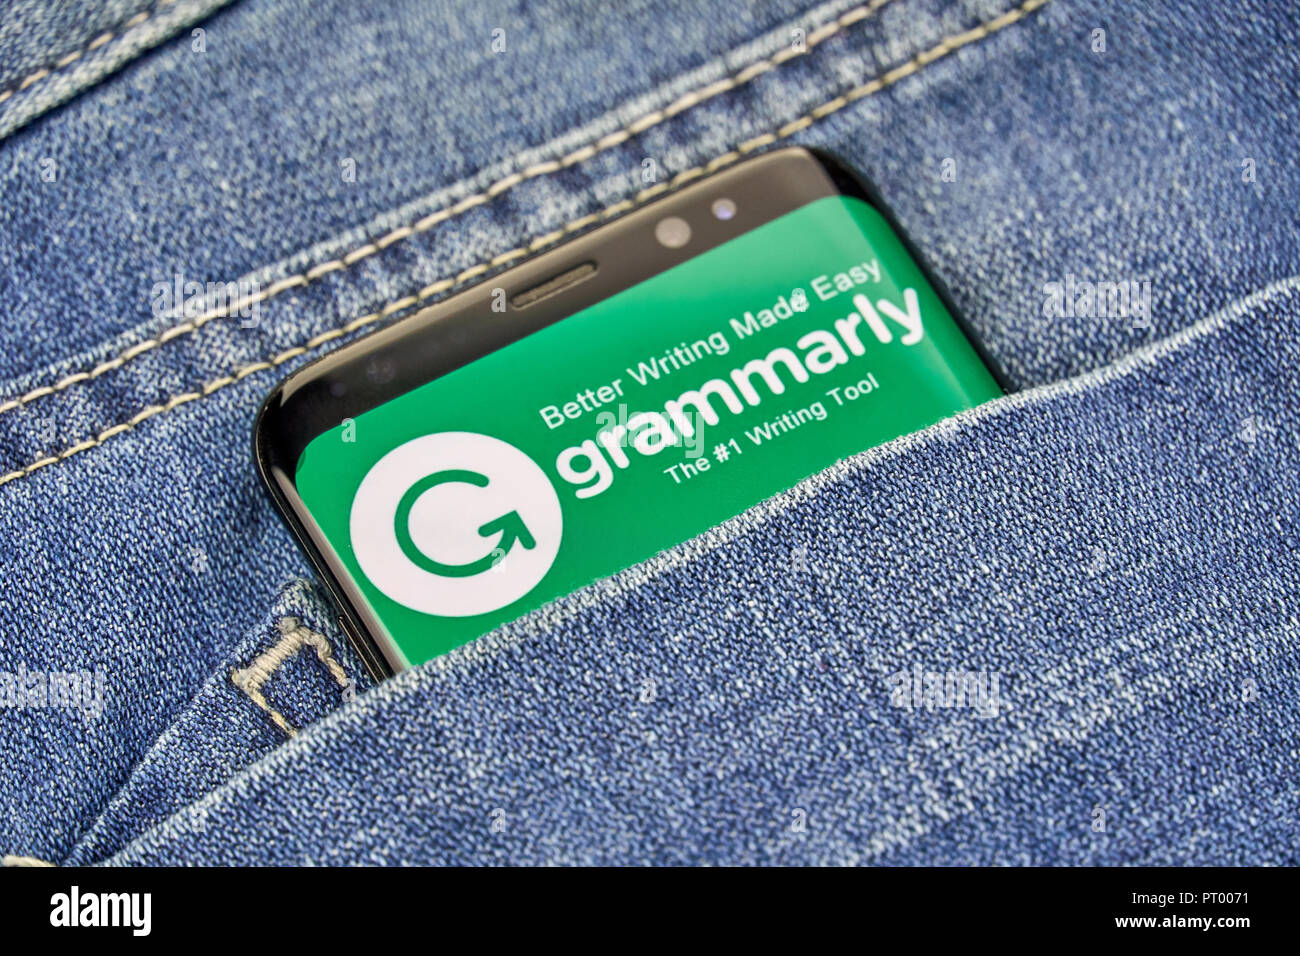 MONTREAL, CANADA - OCTOBER 4, 2018: Grammarly check logo and app on a Samsung s8 screen. Grammarly is a popular English-language writing-enhancement s Stock Photo